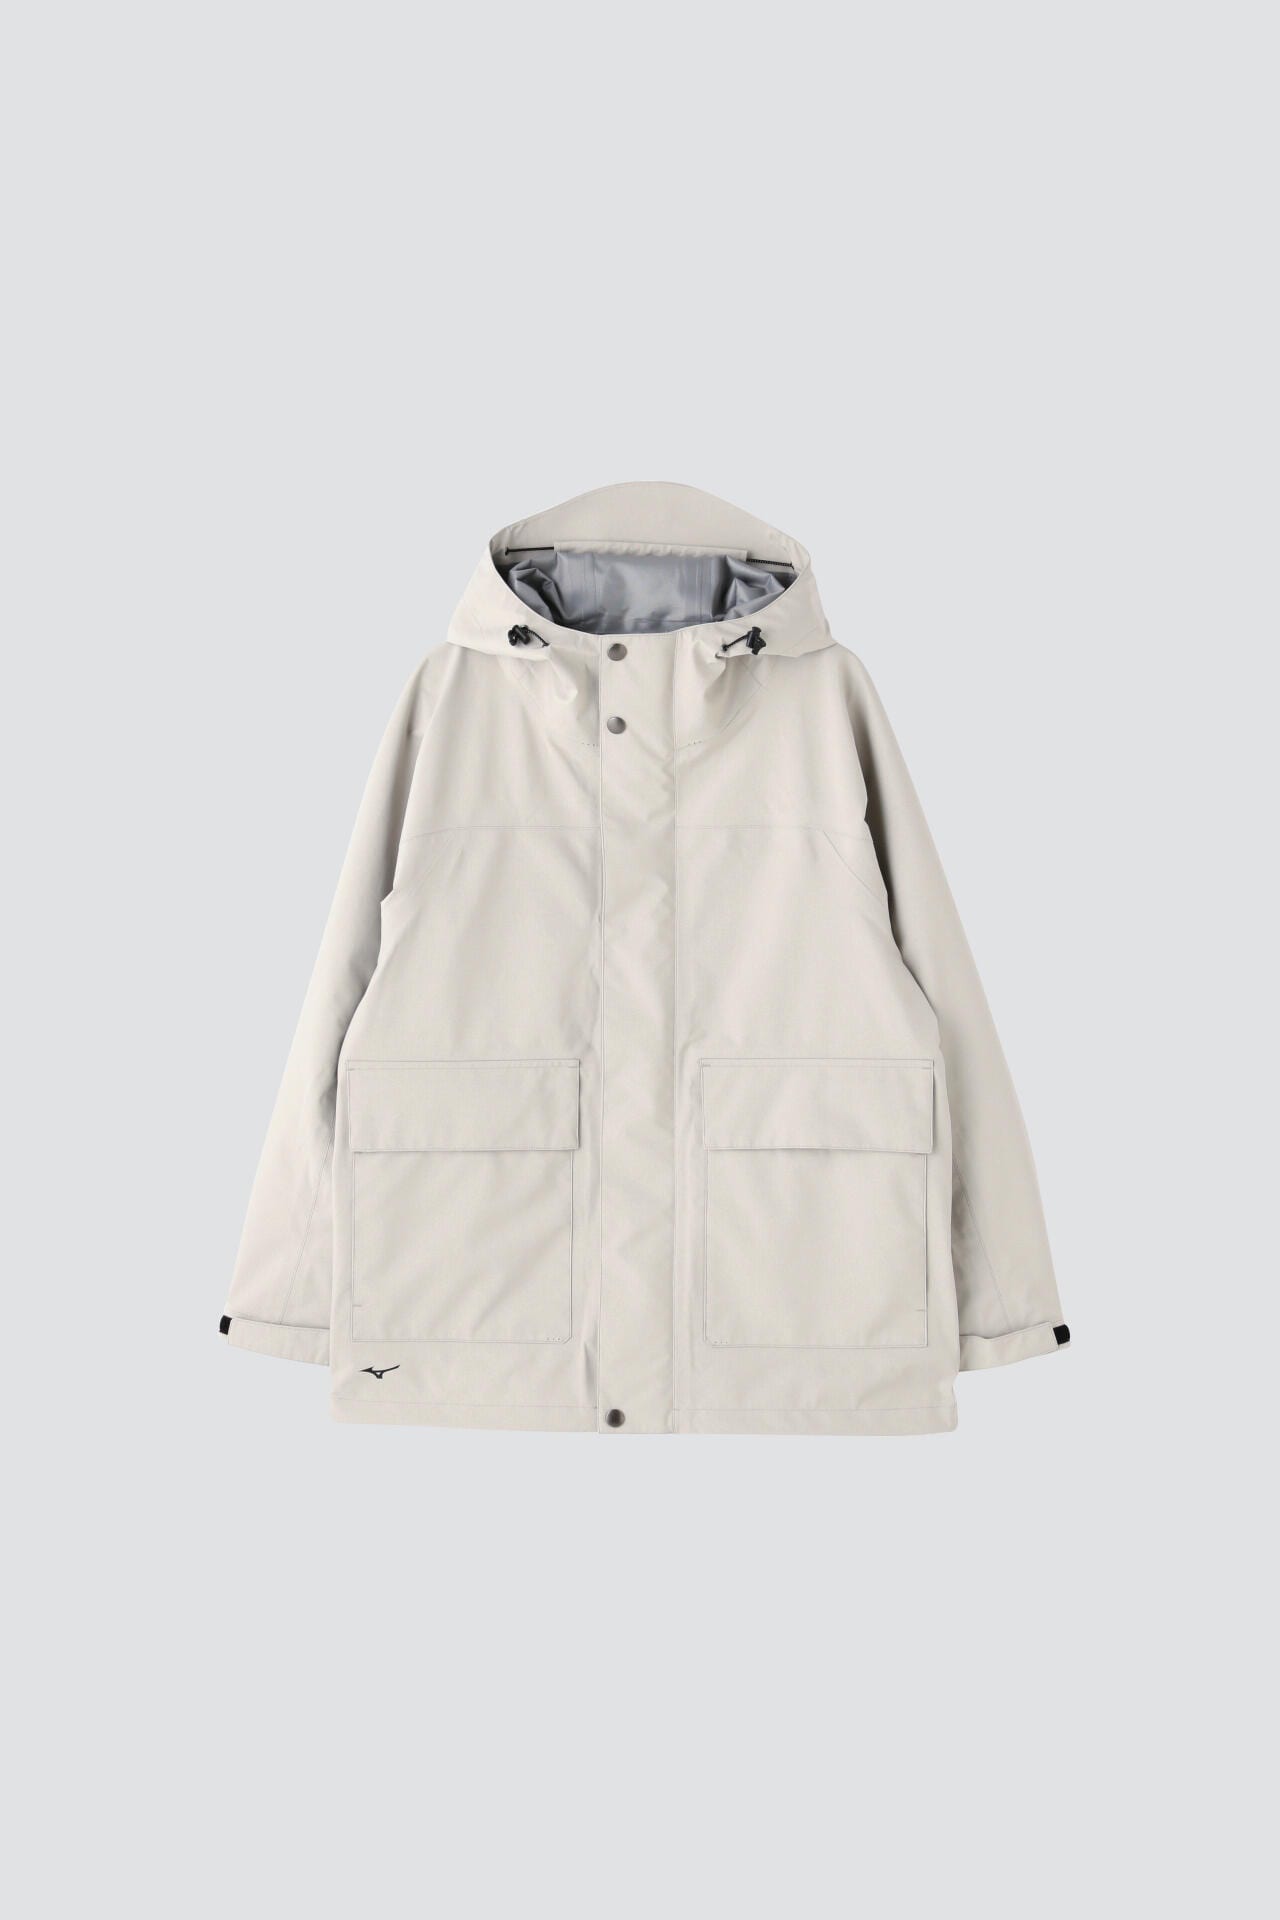 GORE-TEX WATER PROOFED POLYESTER POPLIN | MARGARET HOWELL 